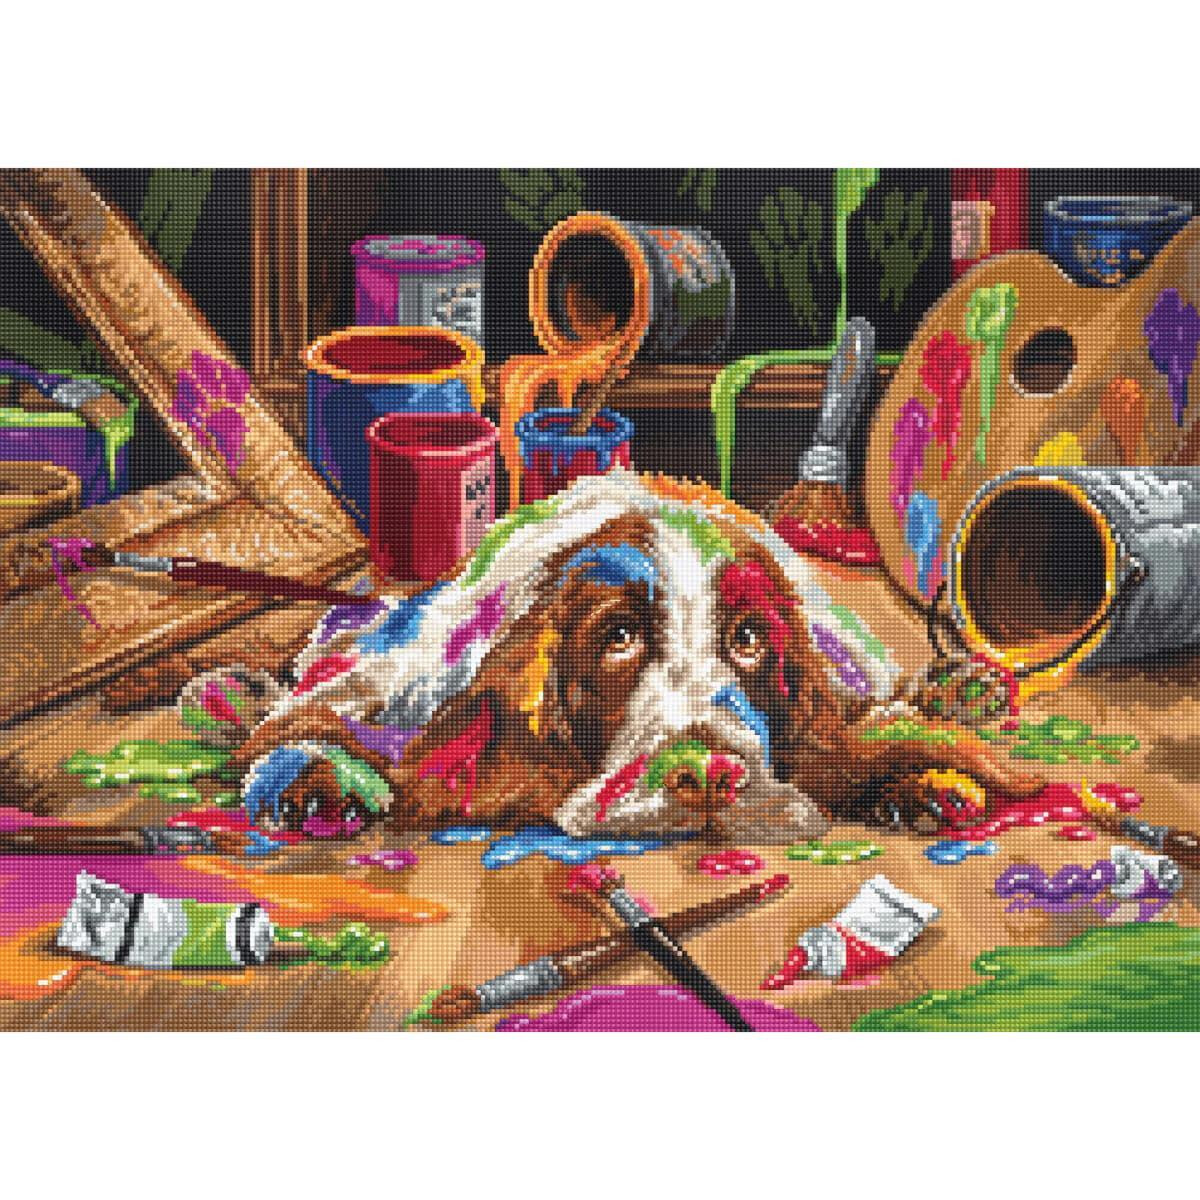 A dog lies on a wooden floor covered in colorful splashes...